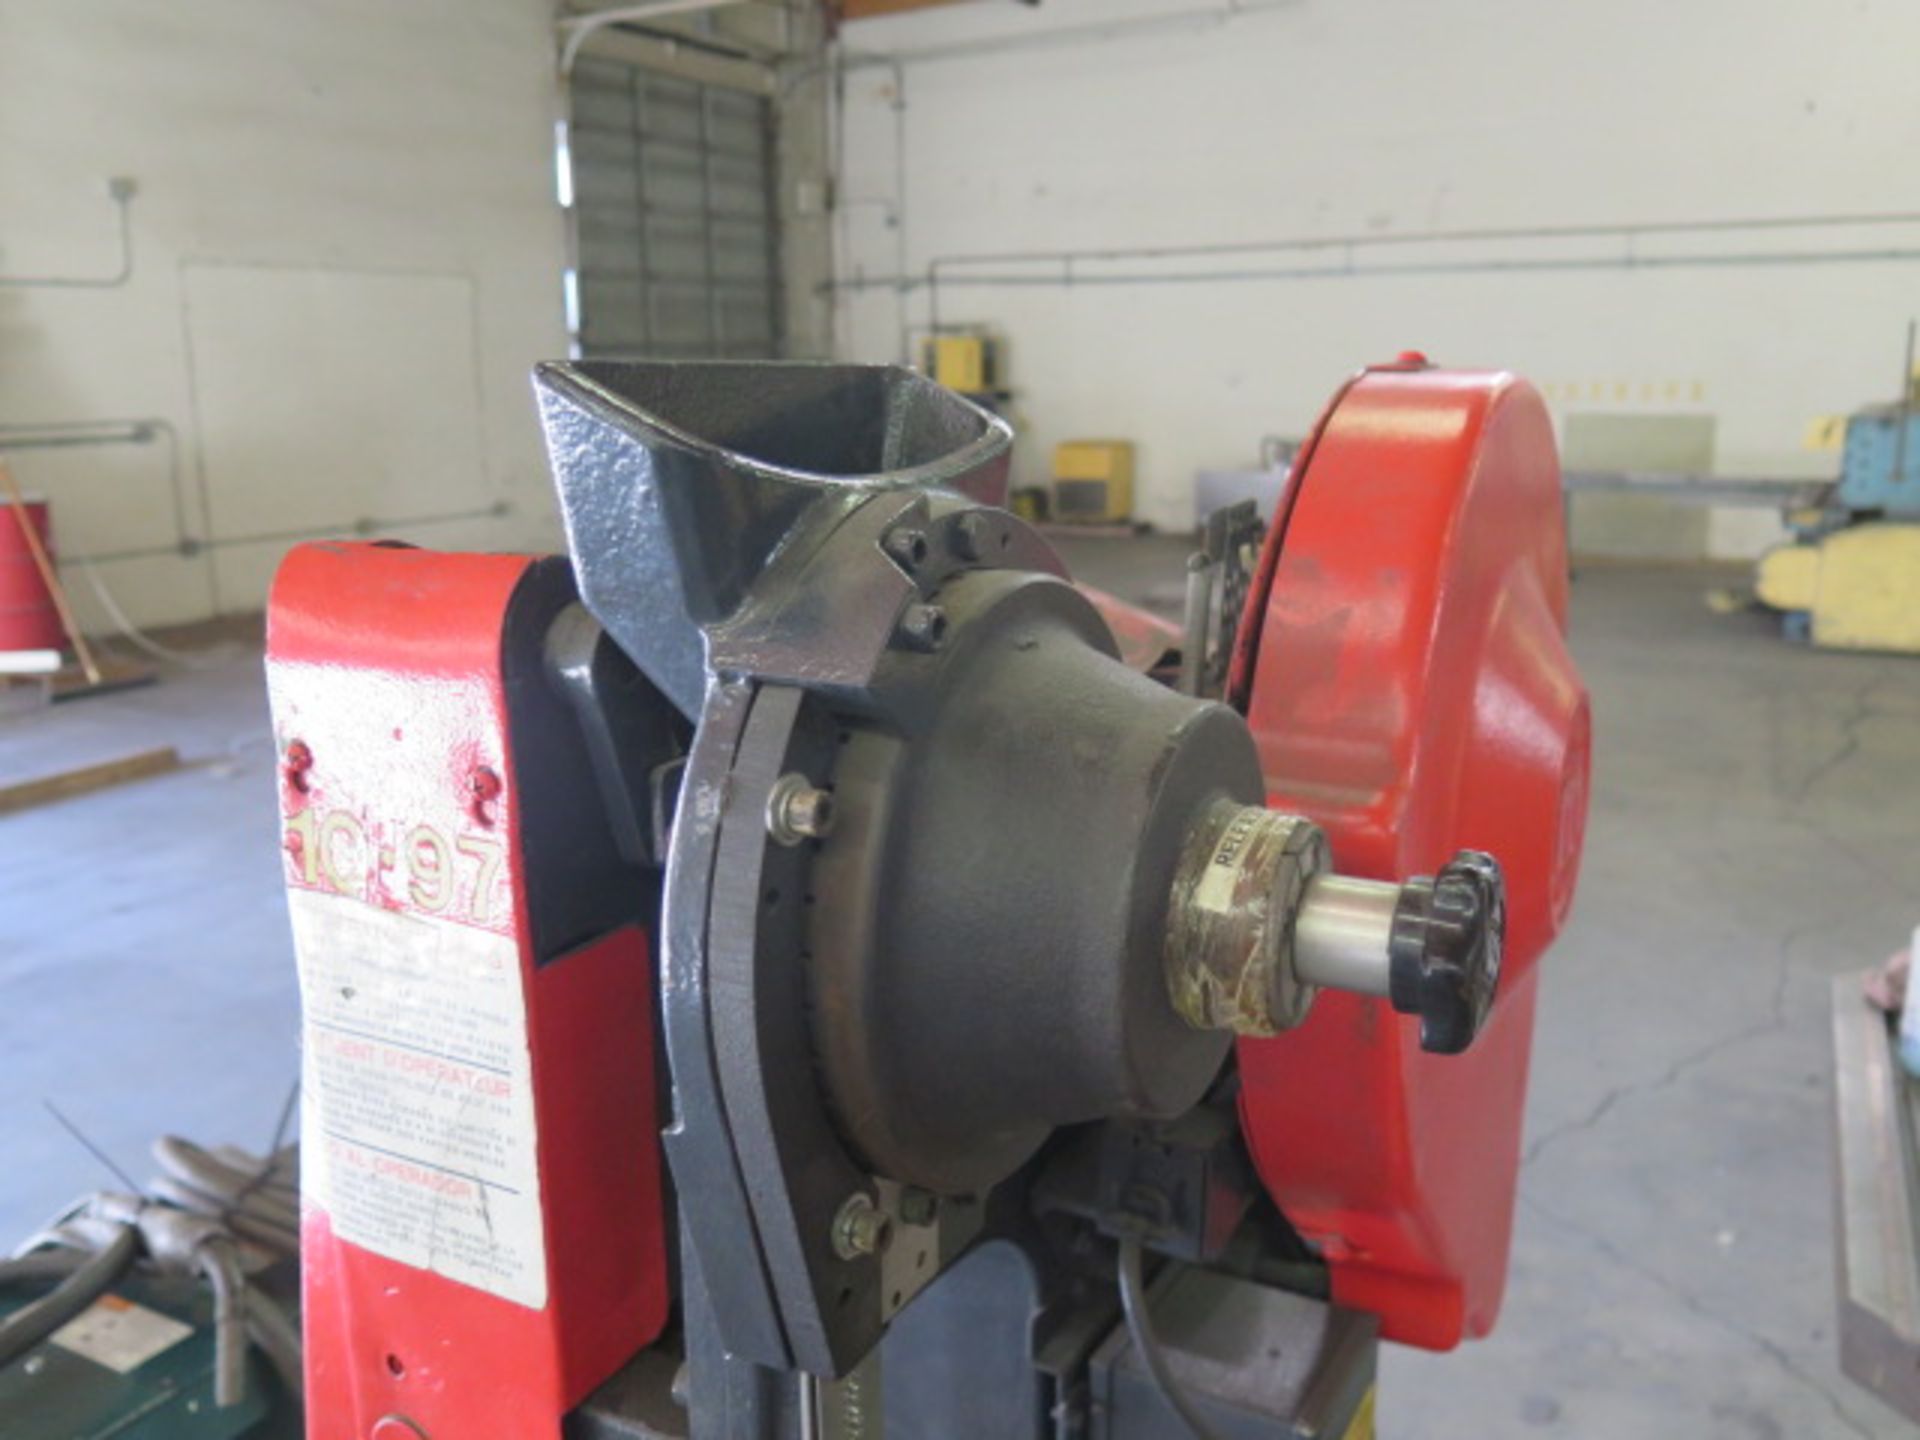 Milford mdl. 256 REV3 Automatic Riveter s/n 1273 w/ Feeder (SOLD AS-IS - NO WARRANTY) - Image 6 of 10